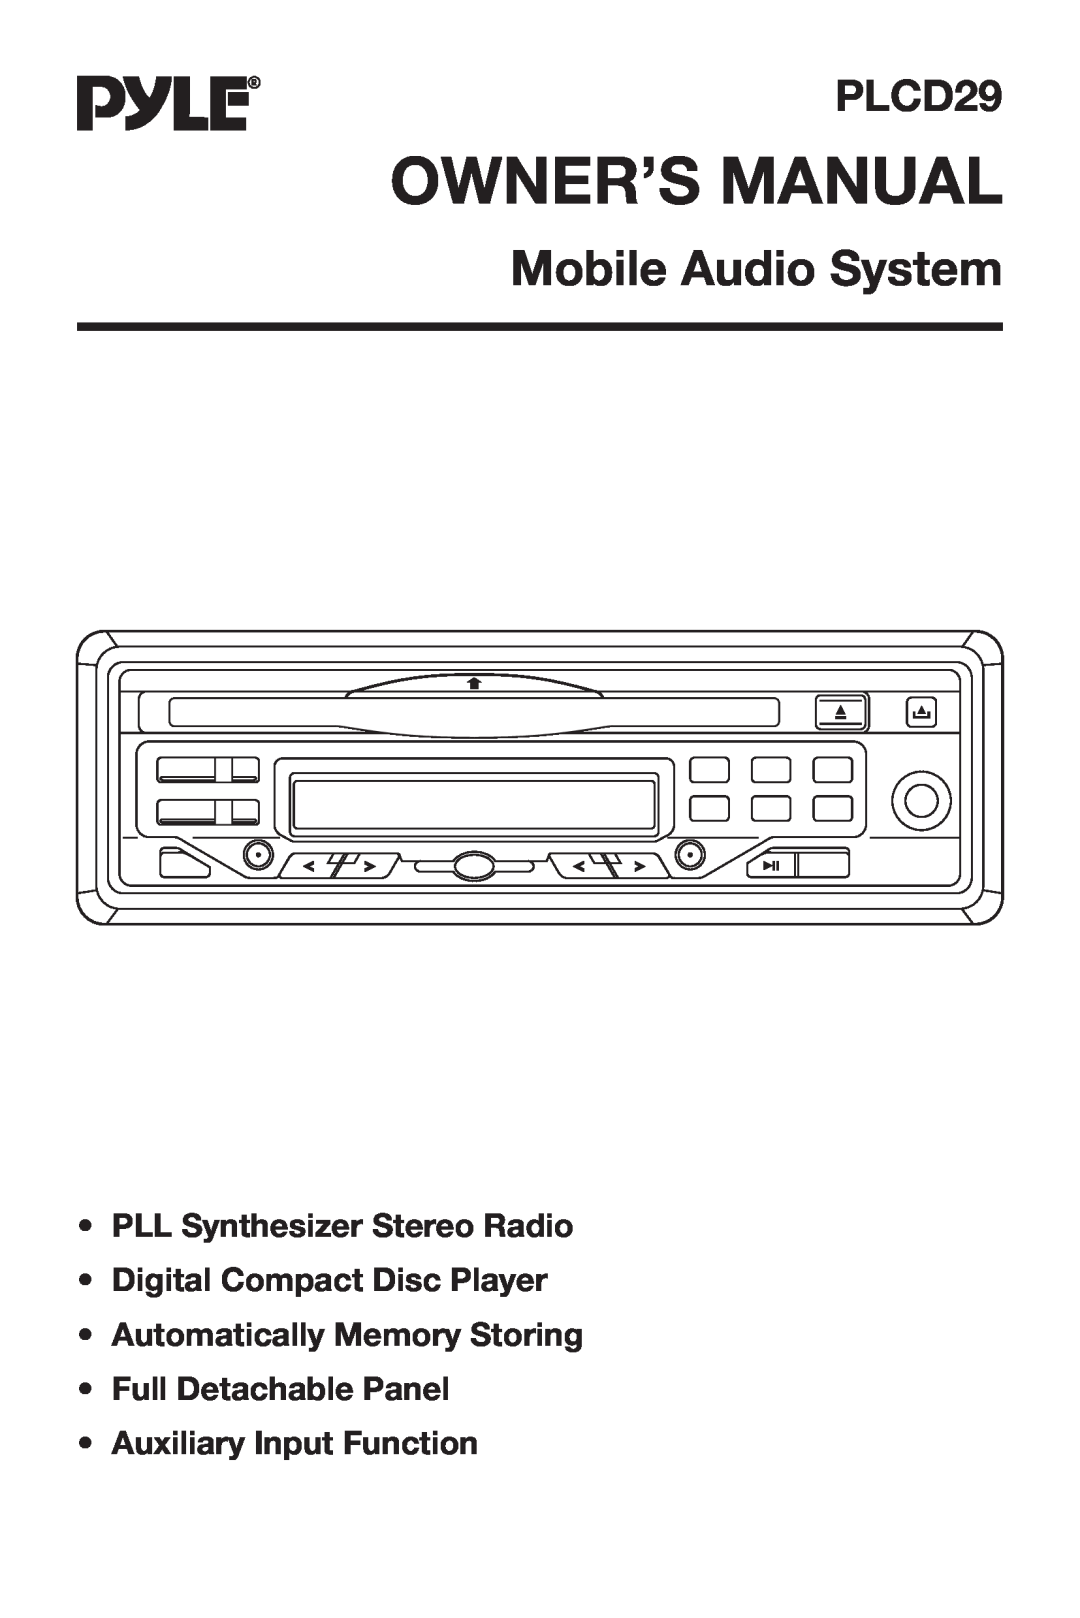 PYLE Audio PLCD29 owner manual •PLL Synthesizer Stereo Radio, •Digital Compact Disc Player, •Automatically Memory Storing 